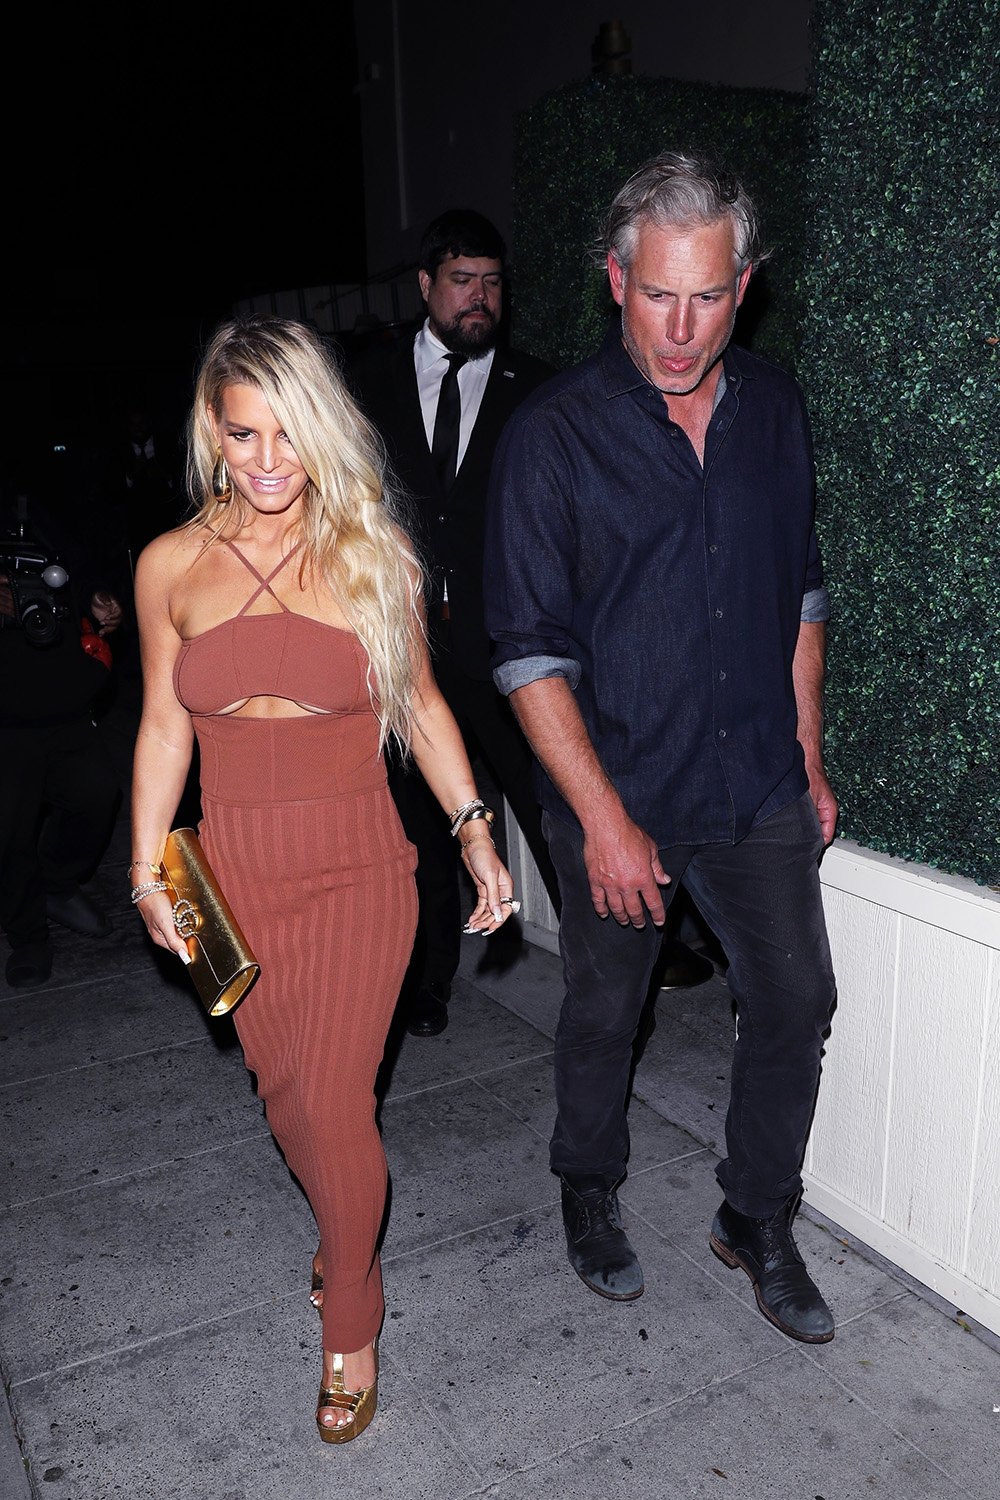 Jessica Simpson Wears Red Hot Dress to Grammys Party